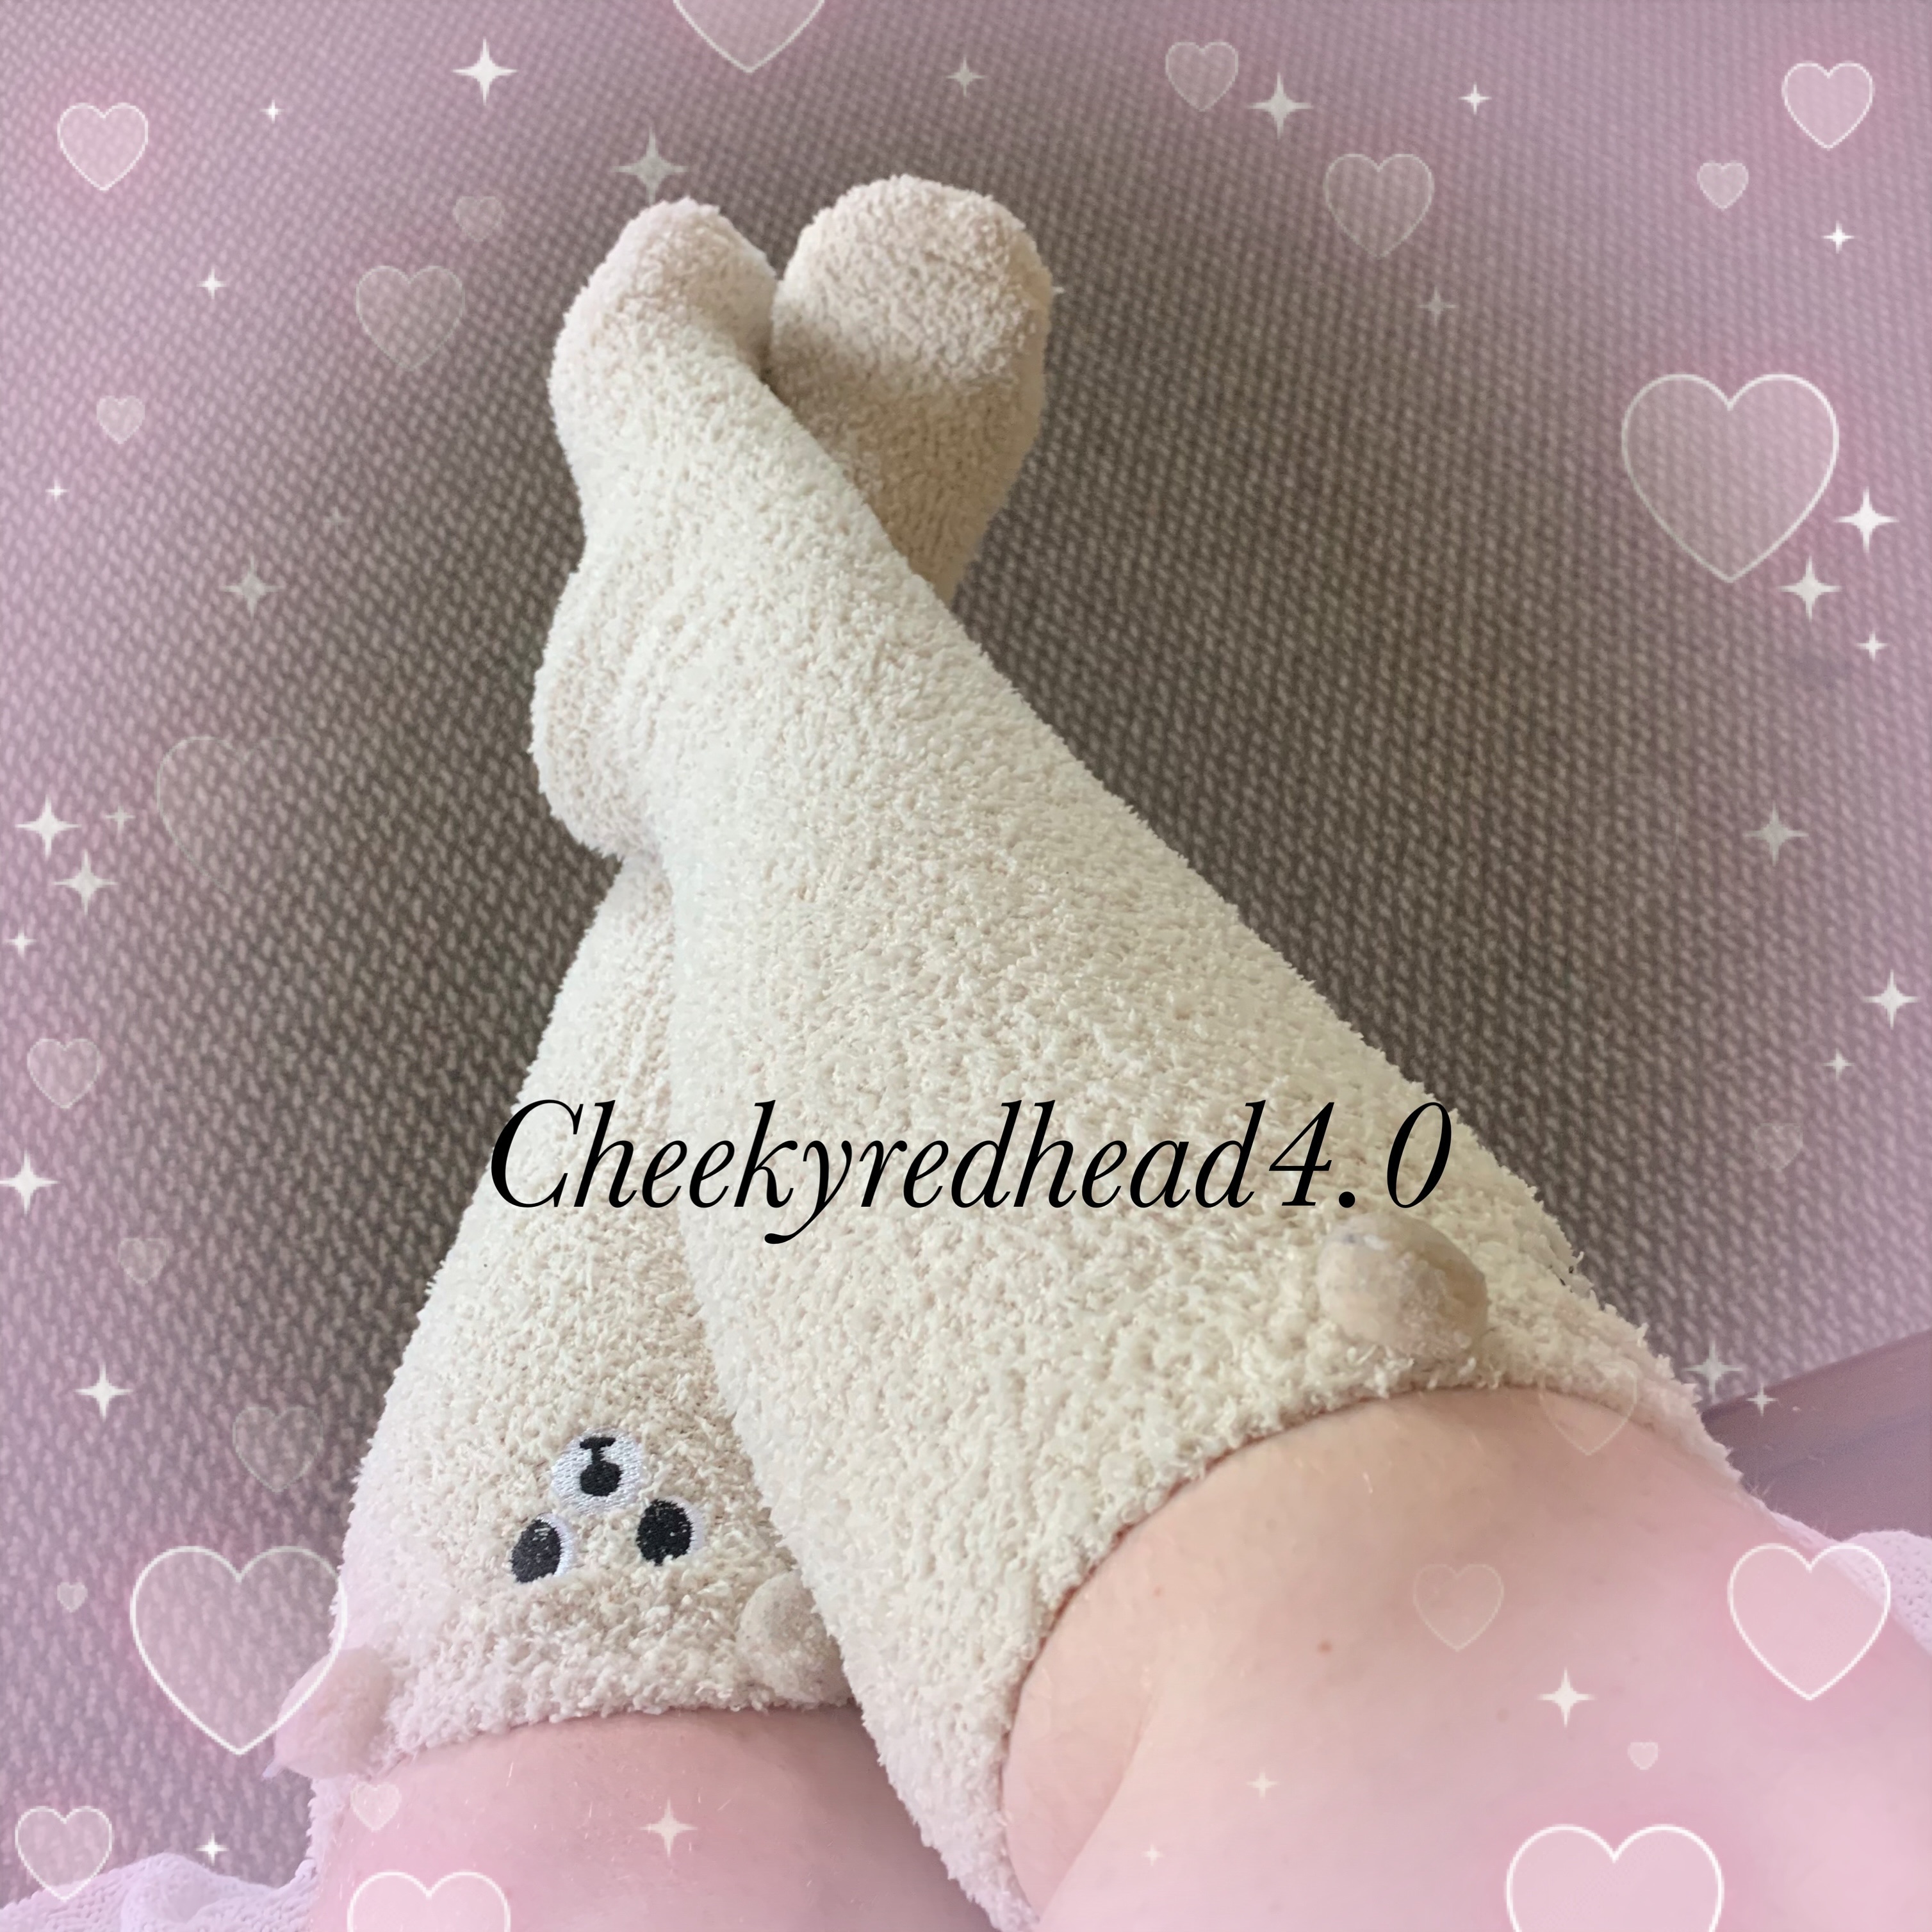 Newest addition to the fuzzy sock collection 🤍 #cutesocks #fuzzysocks #socks #socksdaily #sockstagram #fuzzy #fuzzykneesocks #fuzzykneehighsocks